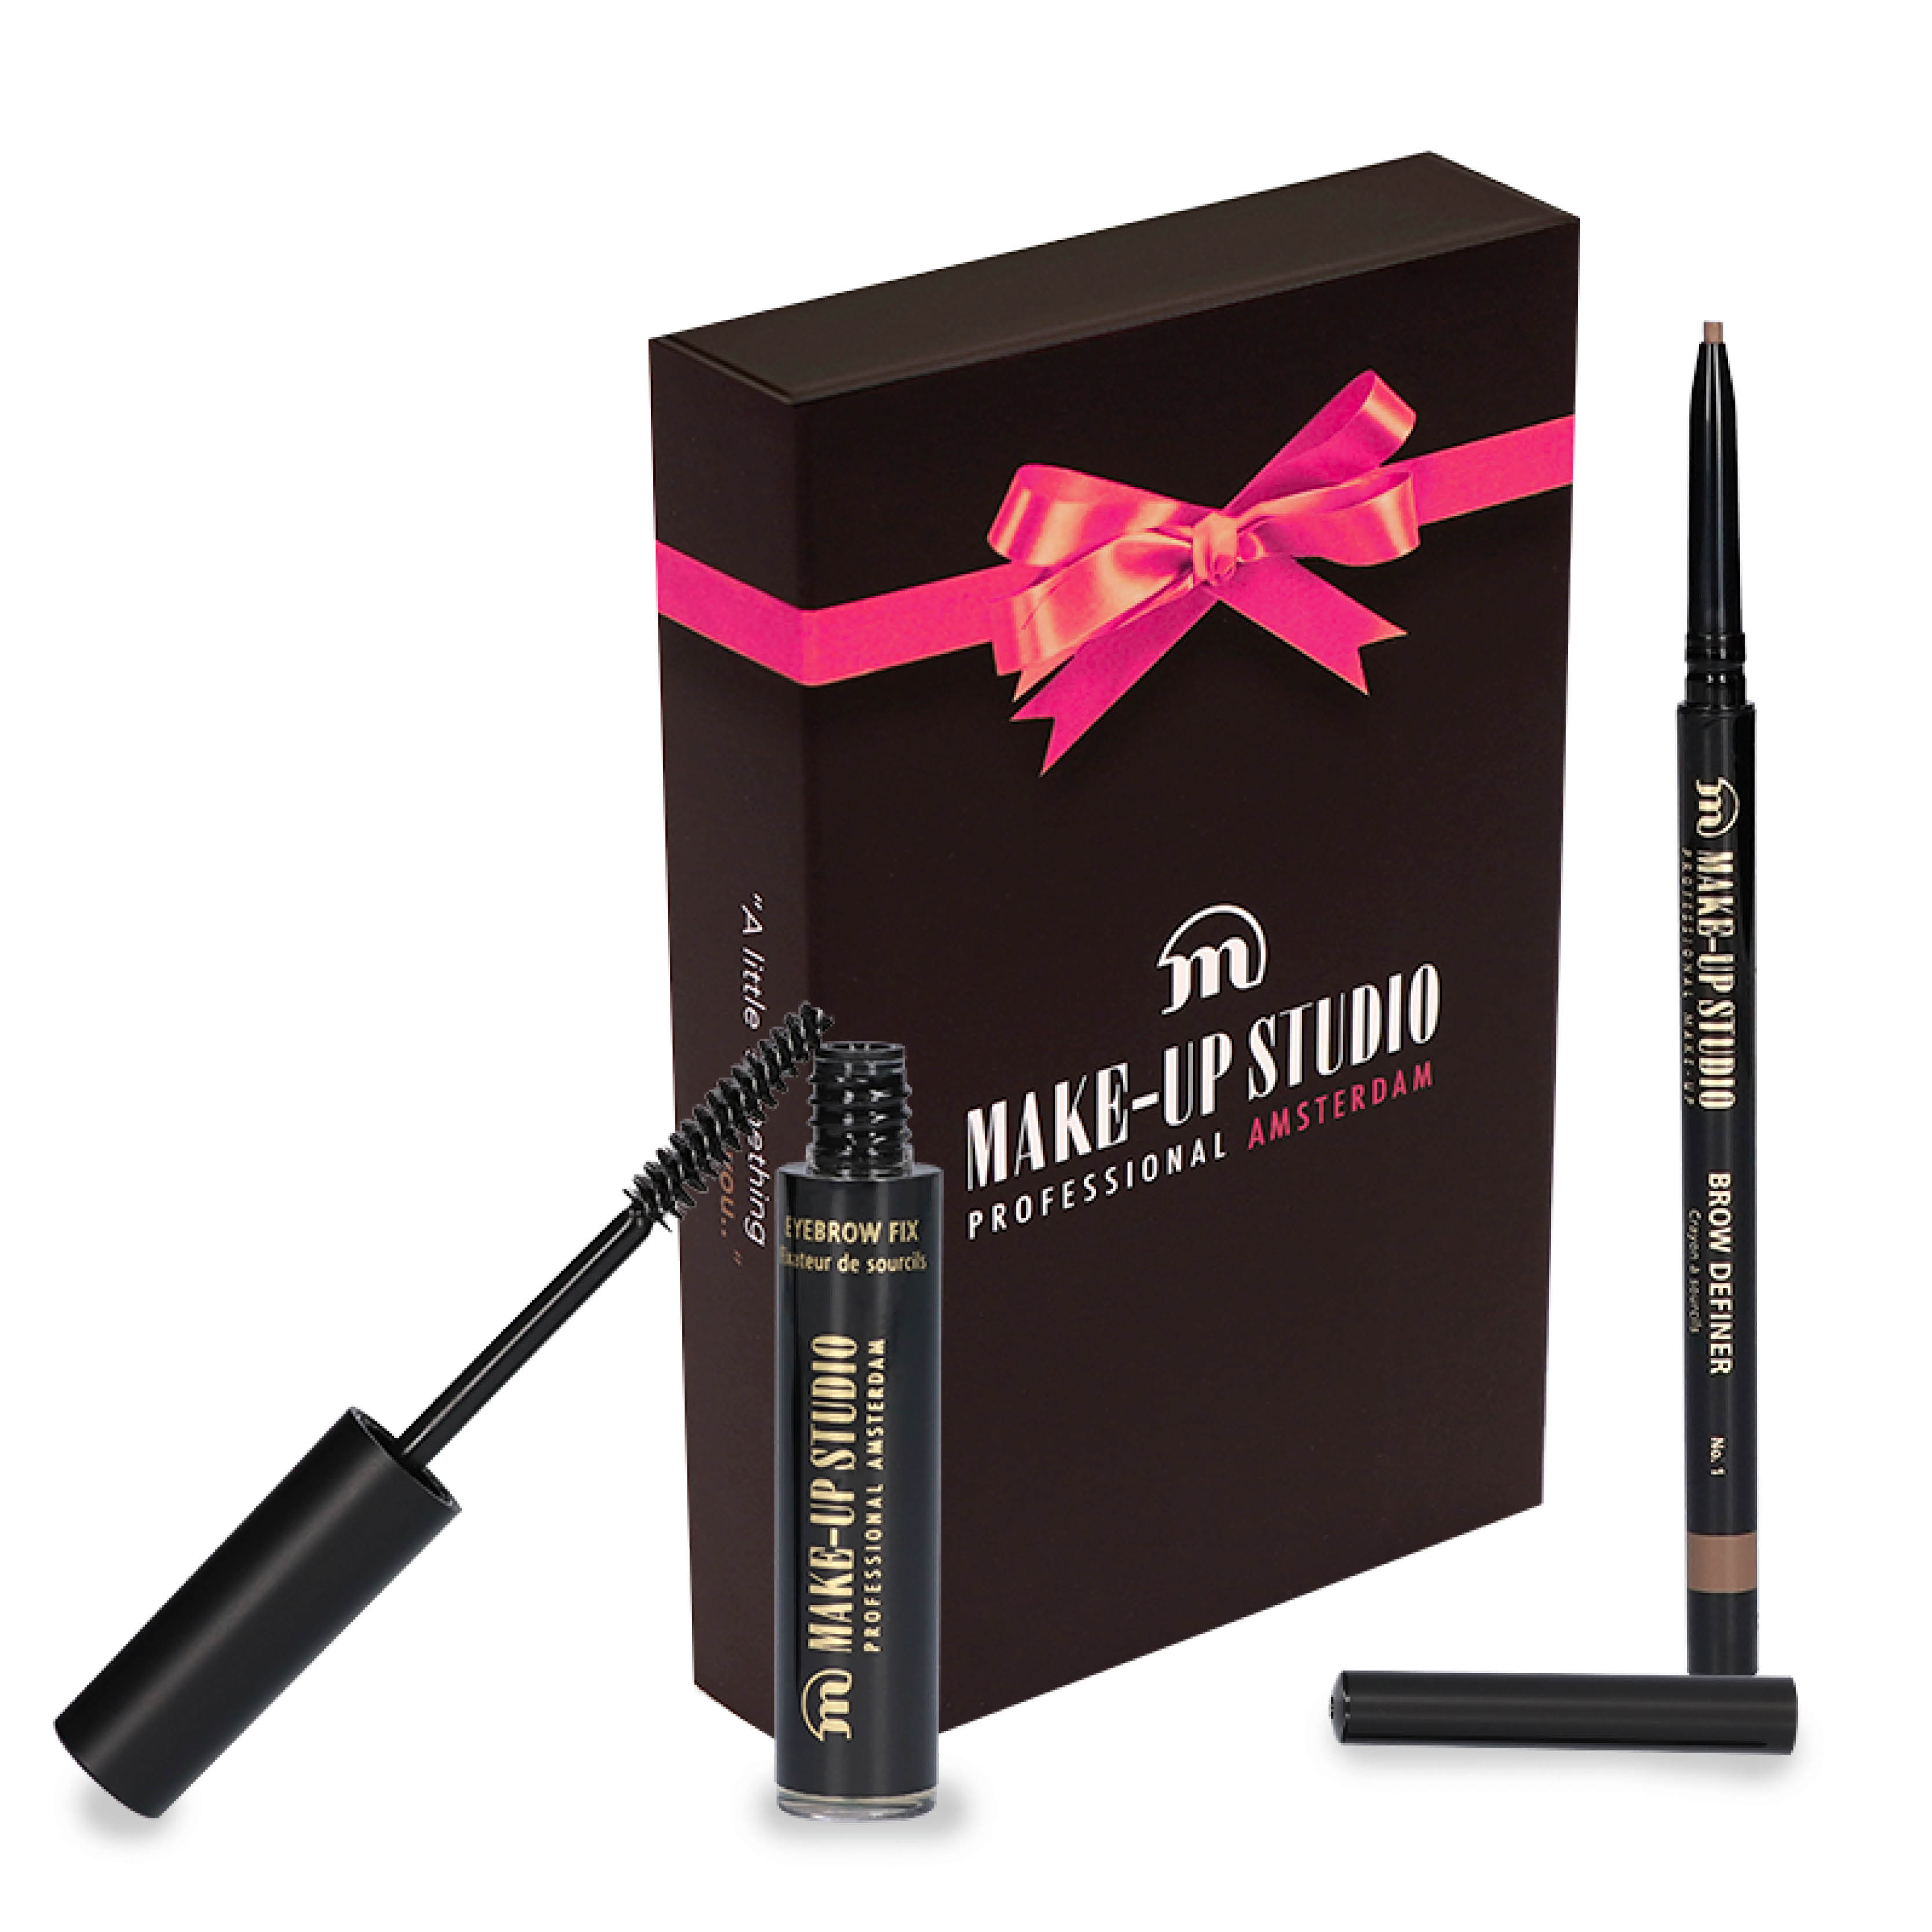 Giftbox Bombshell Brows Blond